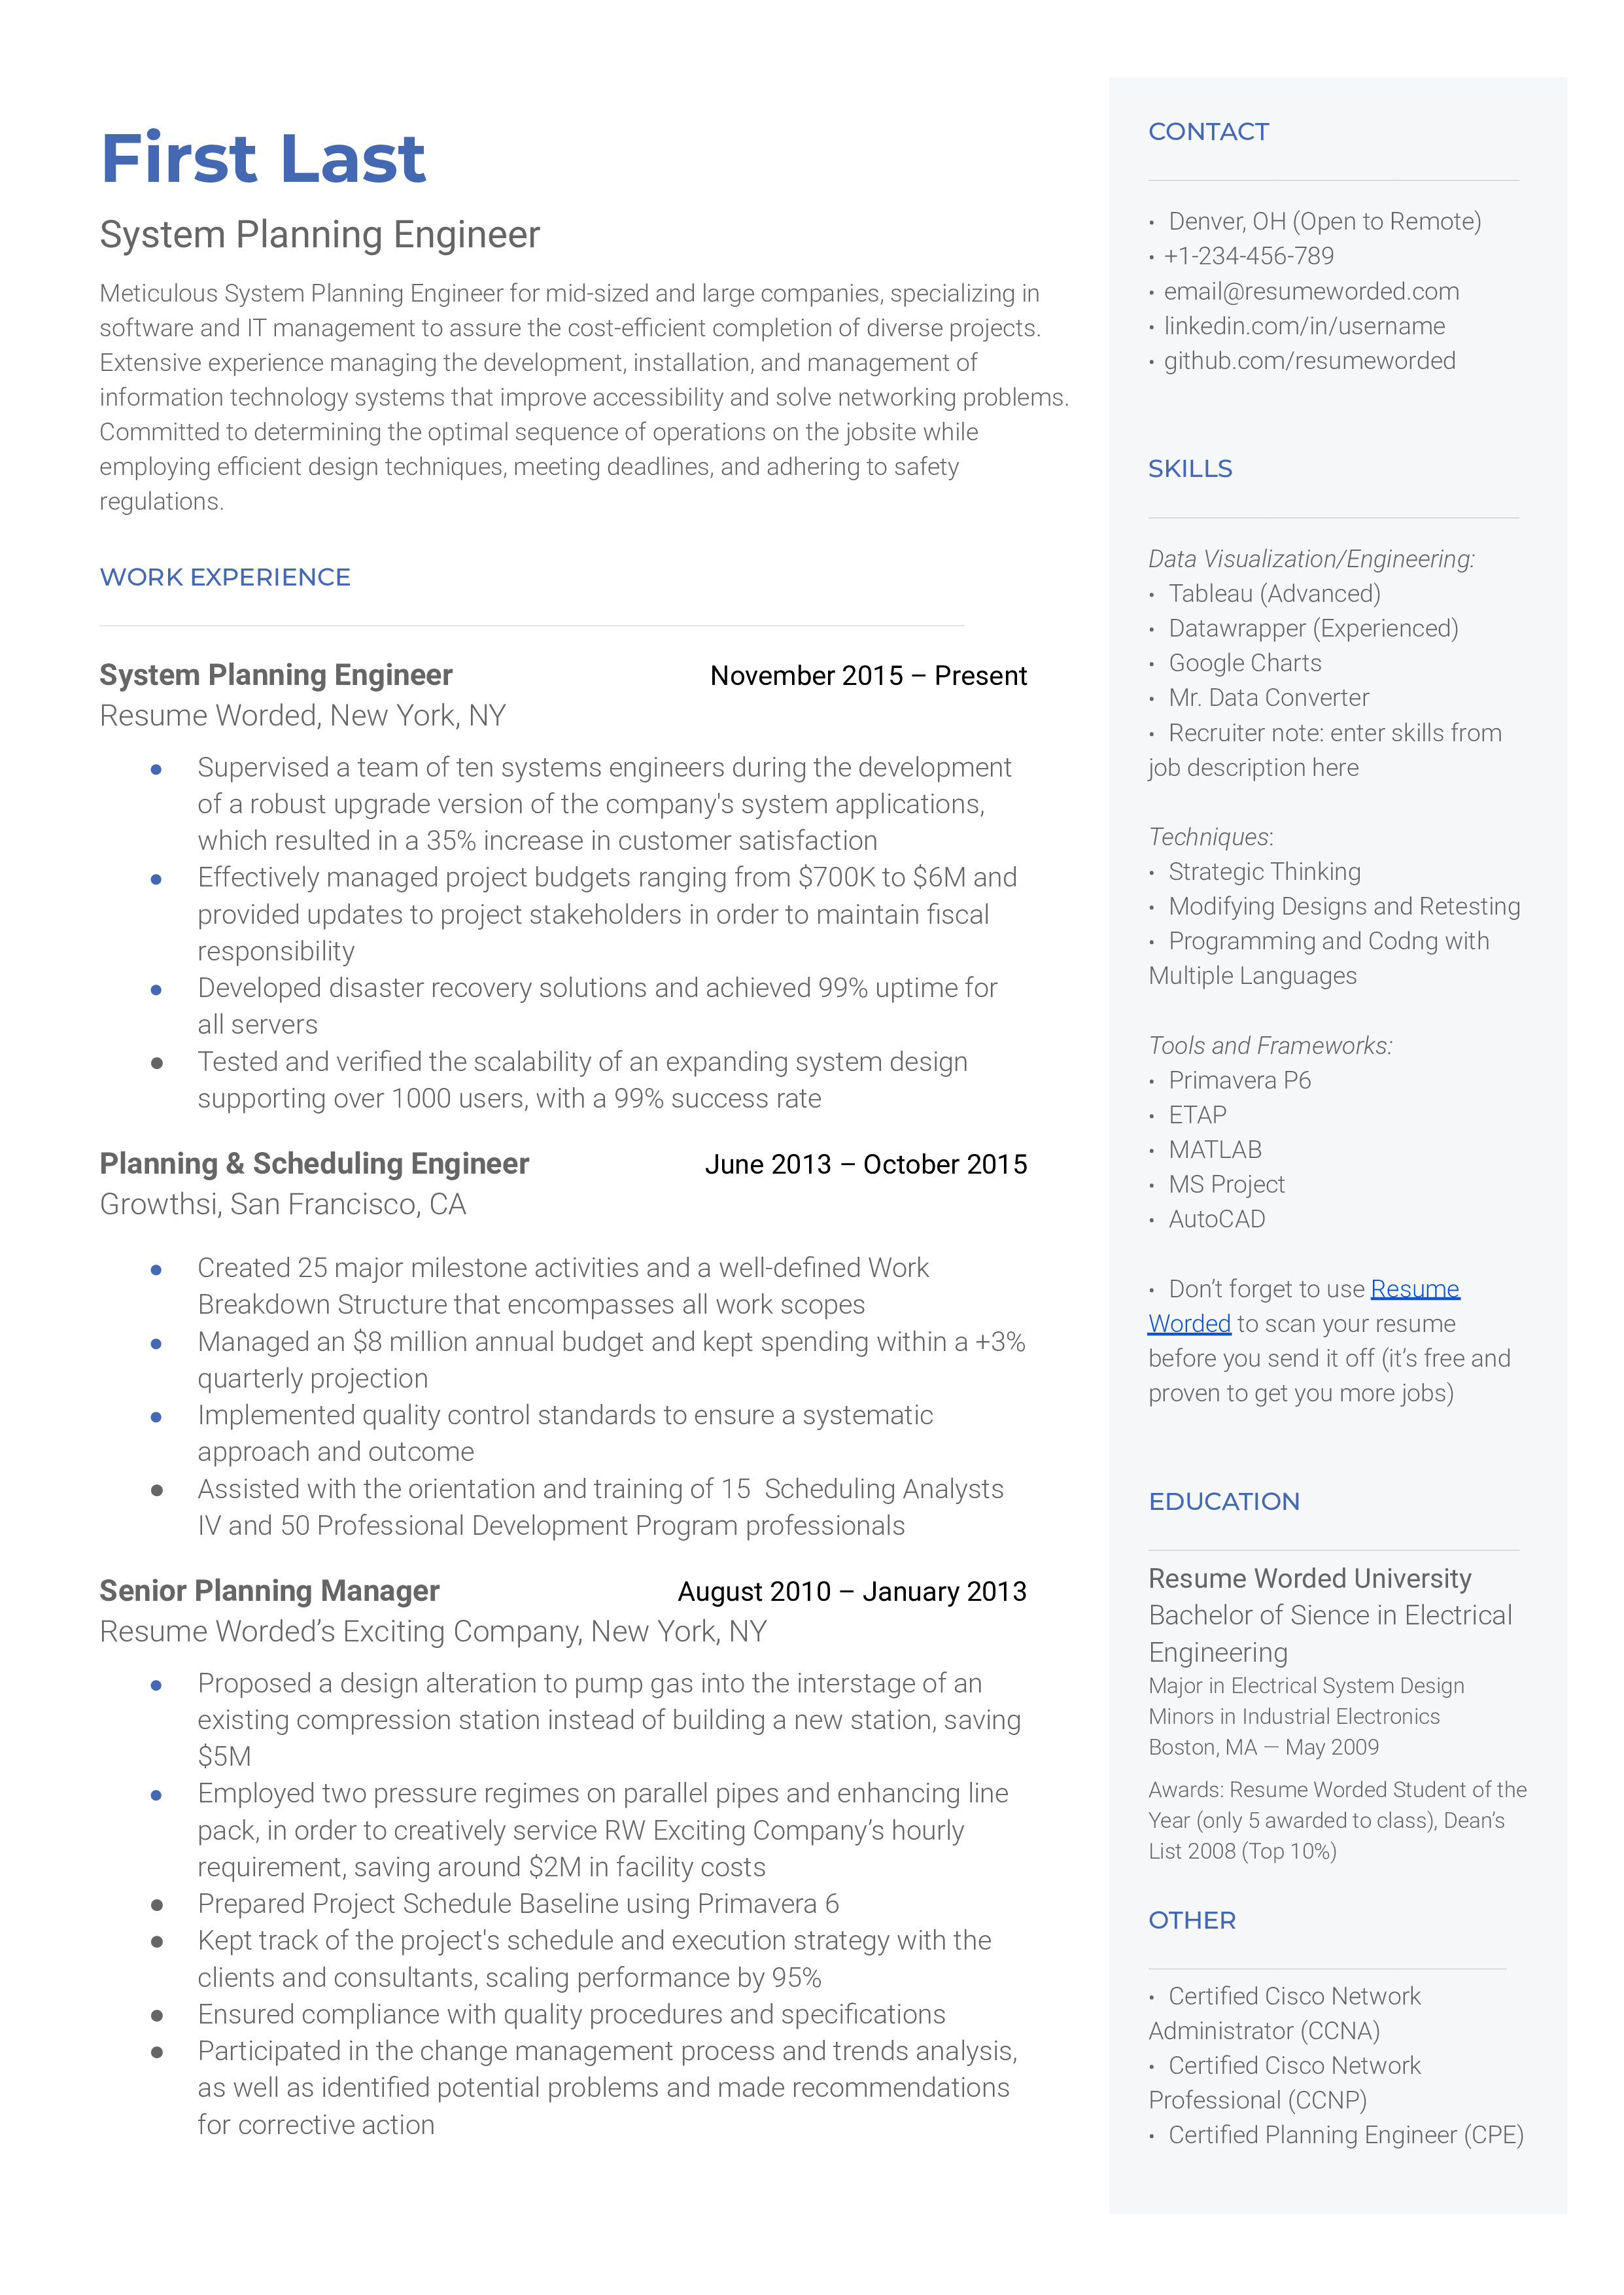 A system planning engineer resume example that highlights the most relevant work experience, followed by skills and education. 